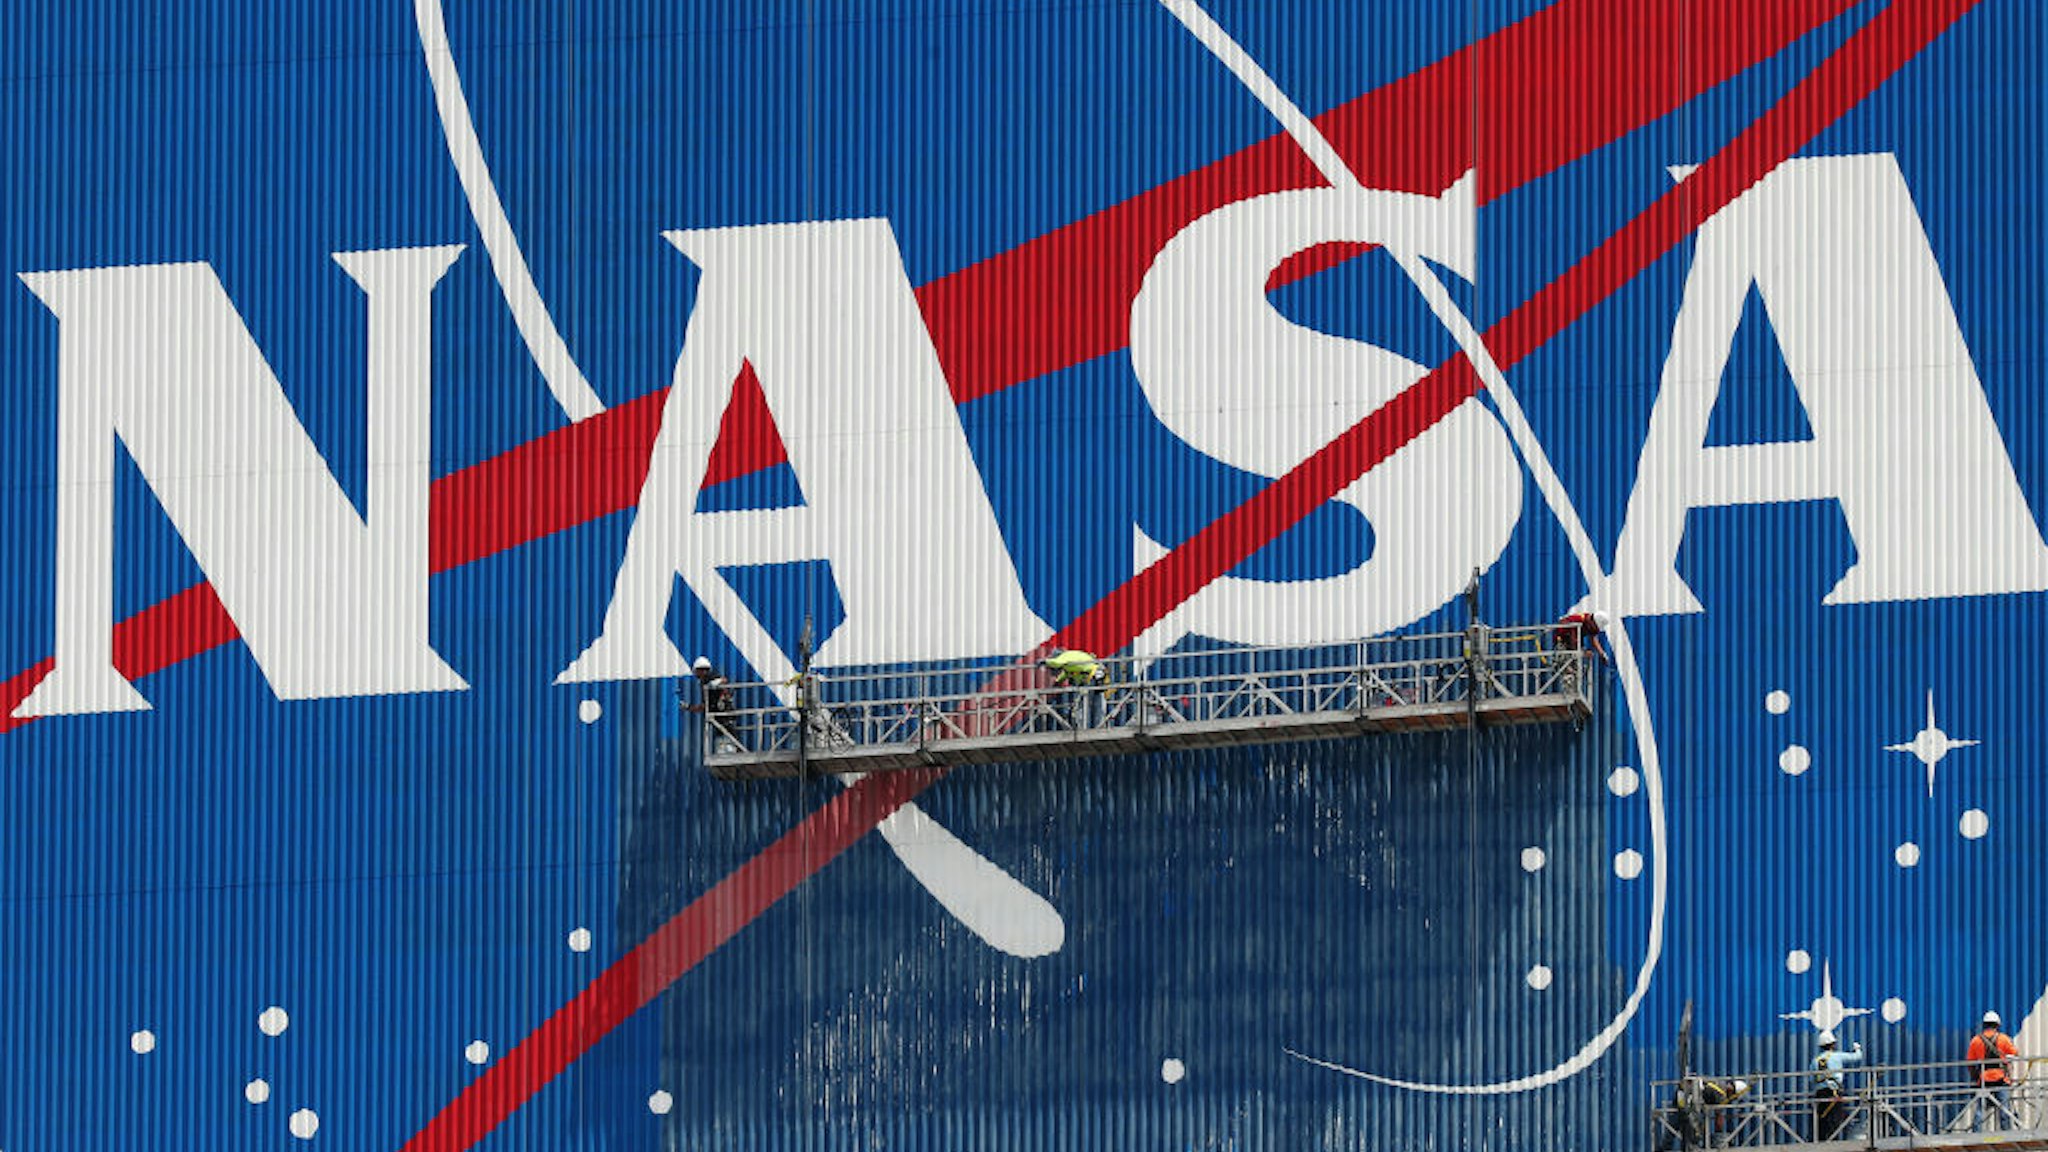 CAPE CANAVERAL, FLORIDA - MAY 28: Workers repaint the NASA logo on the Vehicle Assembly Building at the Kennedy Space Center on May 28, 2020 in Cape Canaveral, Florida. SpaceX’s Crew Dragon spacecraft will try to launch again on Saturday after weather scrubbed yesterday's attempt. It will be the first manned mission since the end of the Space Shuttle program in 2011 to be launched into space from the United States. (Photo by Joe Raedle/Getty Images)